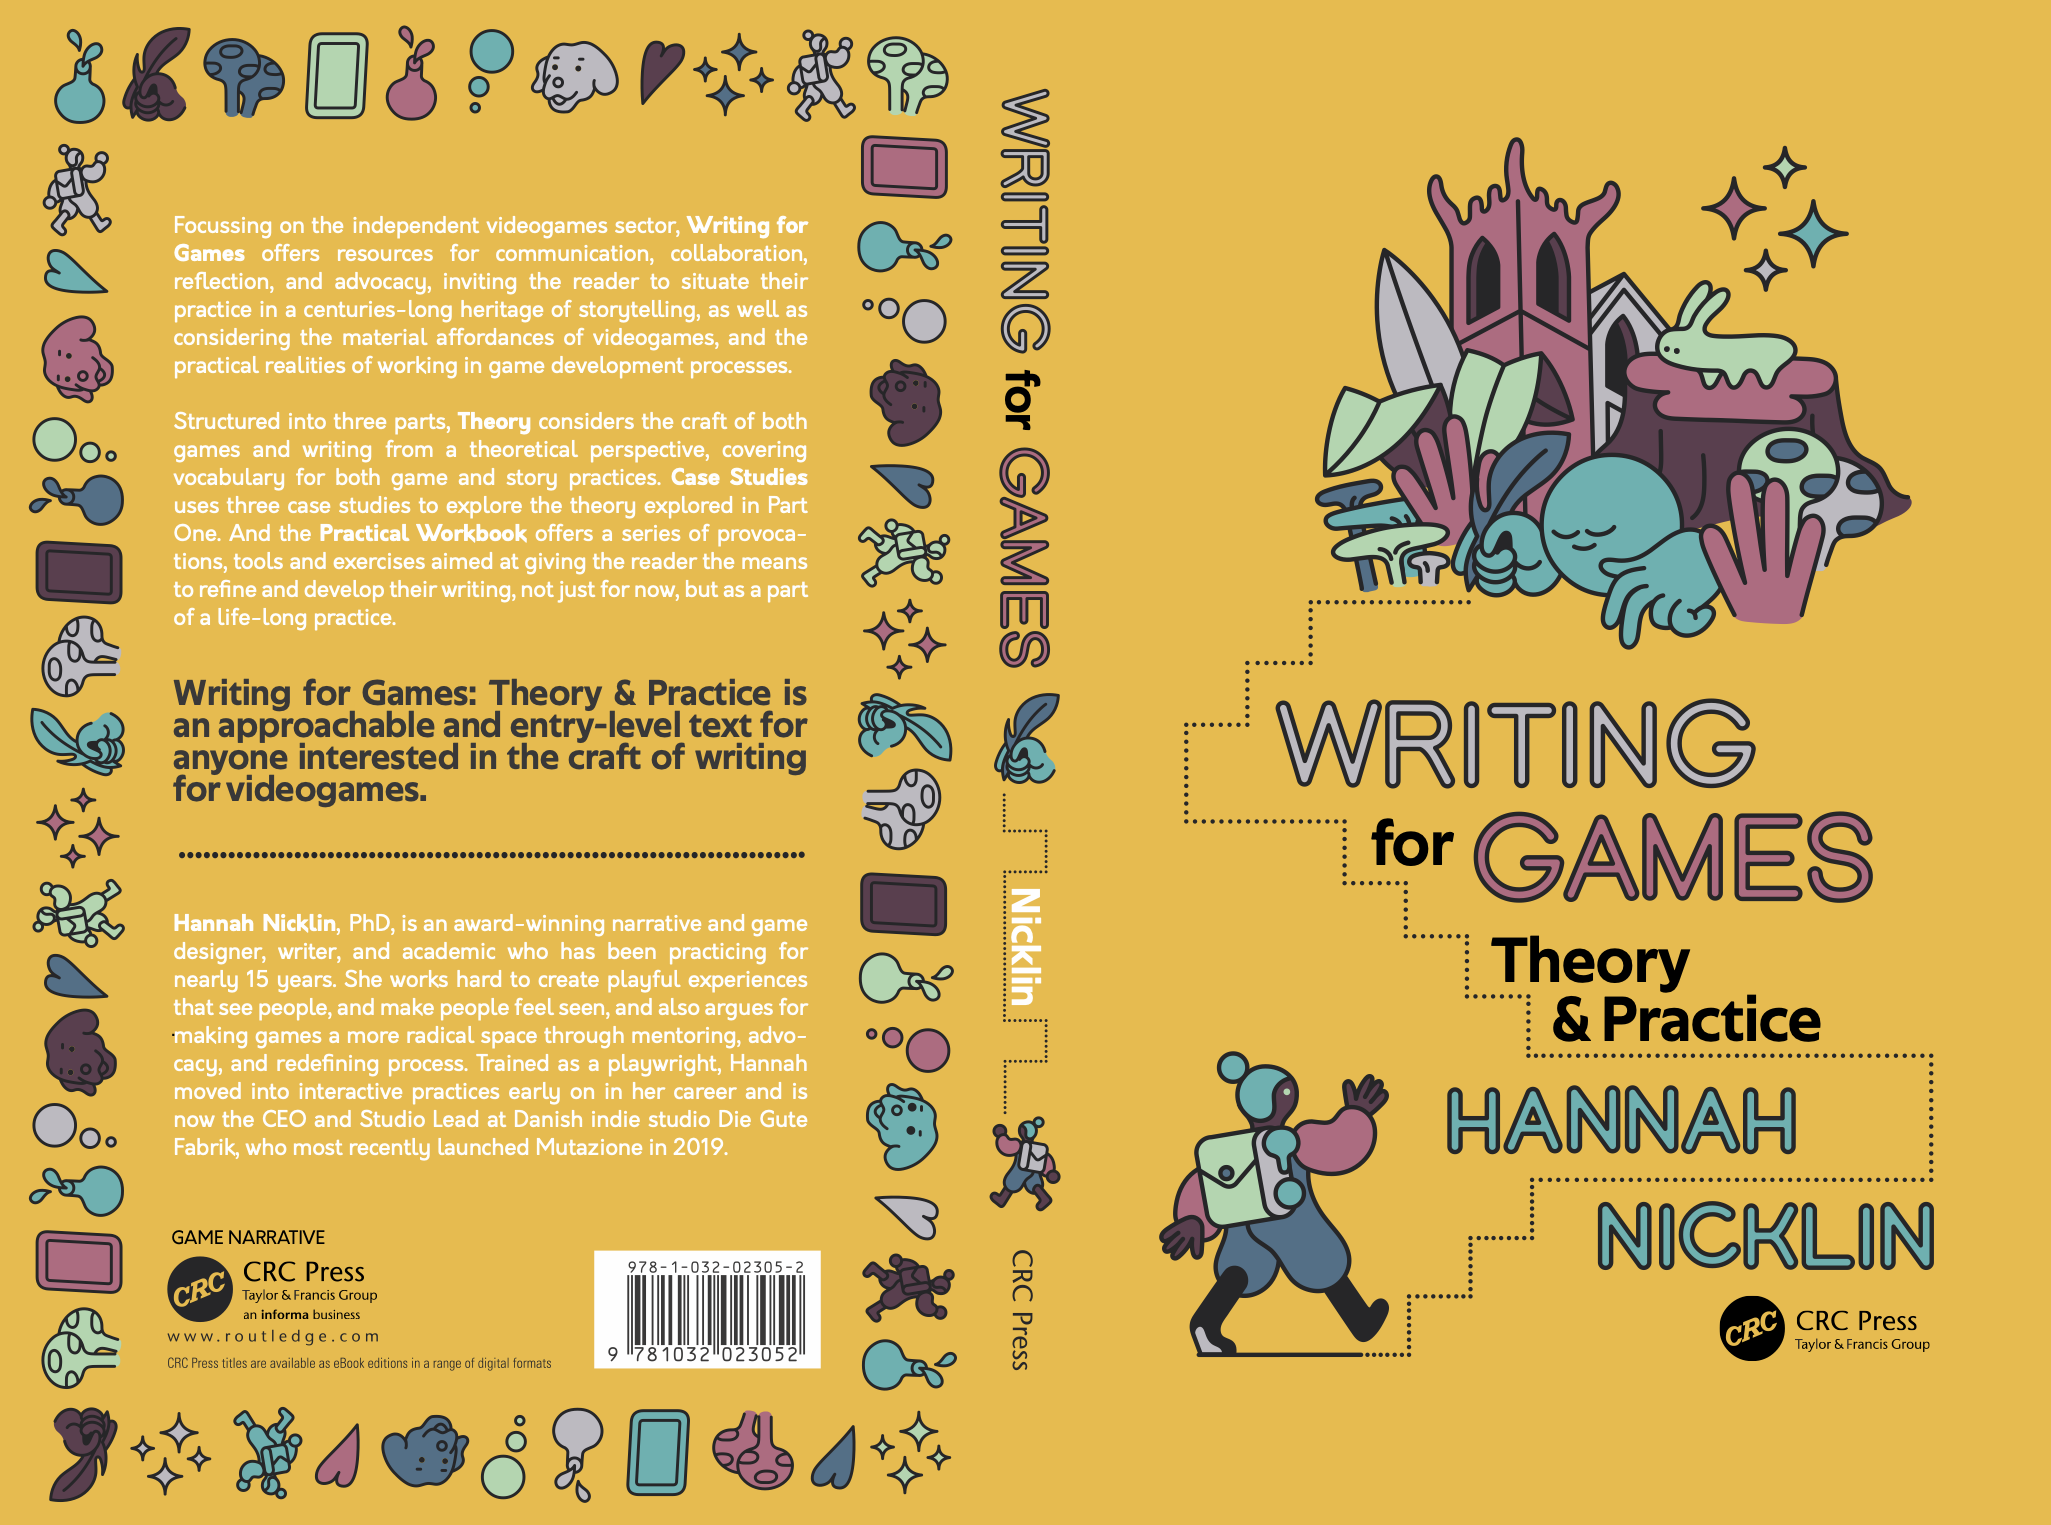 Writing for Games book cover by Hannah Nicklin